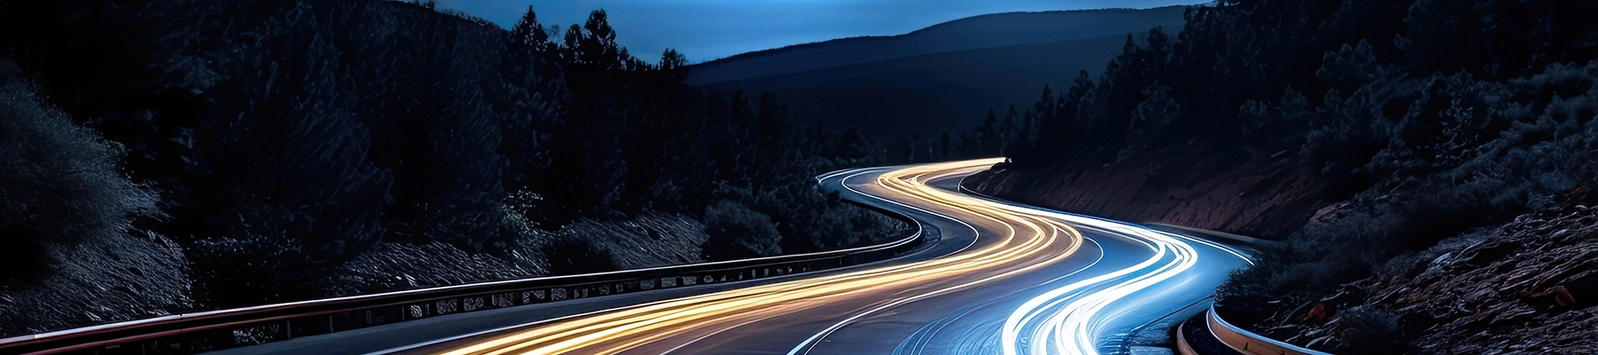 Cars light up trails at night on a curved paved road at night. 2024/03/lights-on-road-1800-02.jpg 